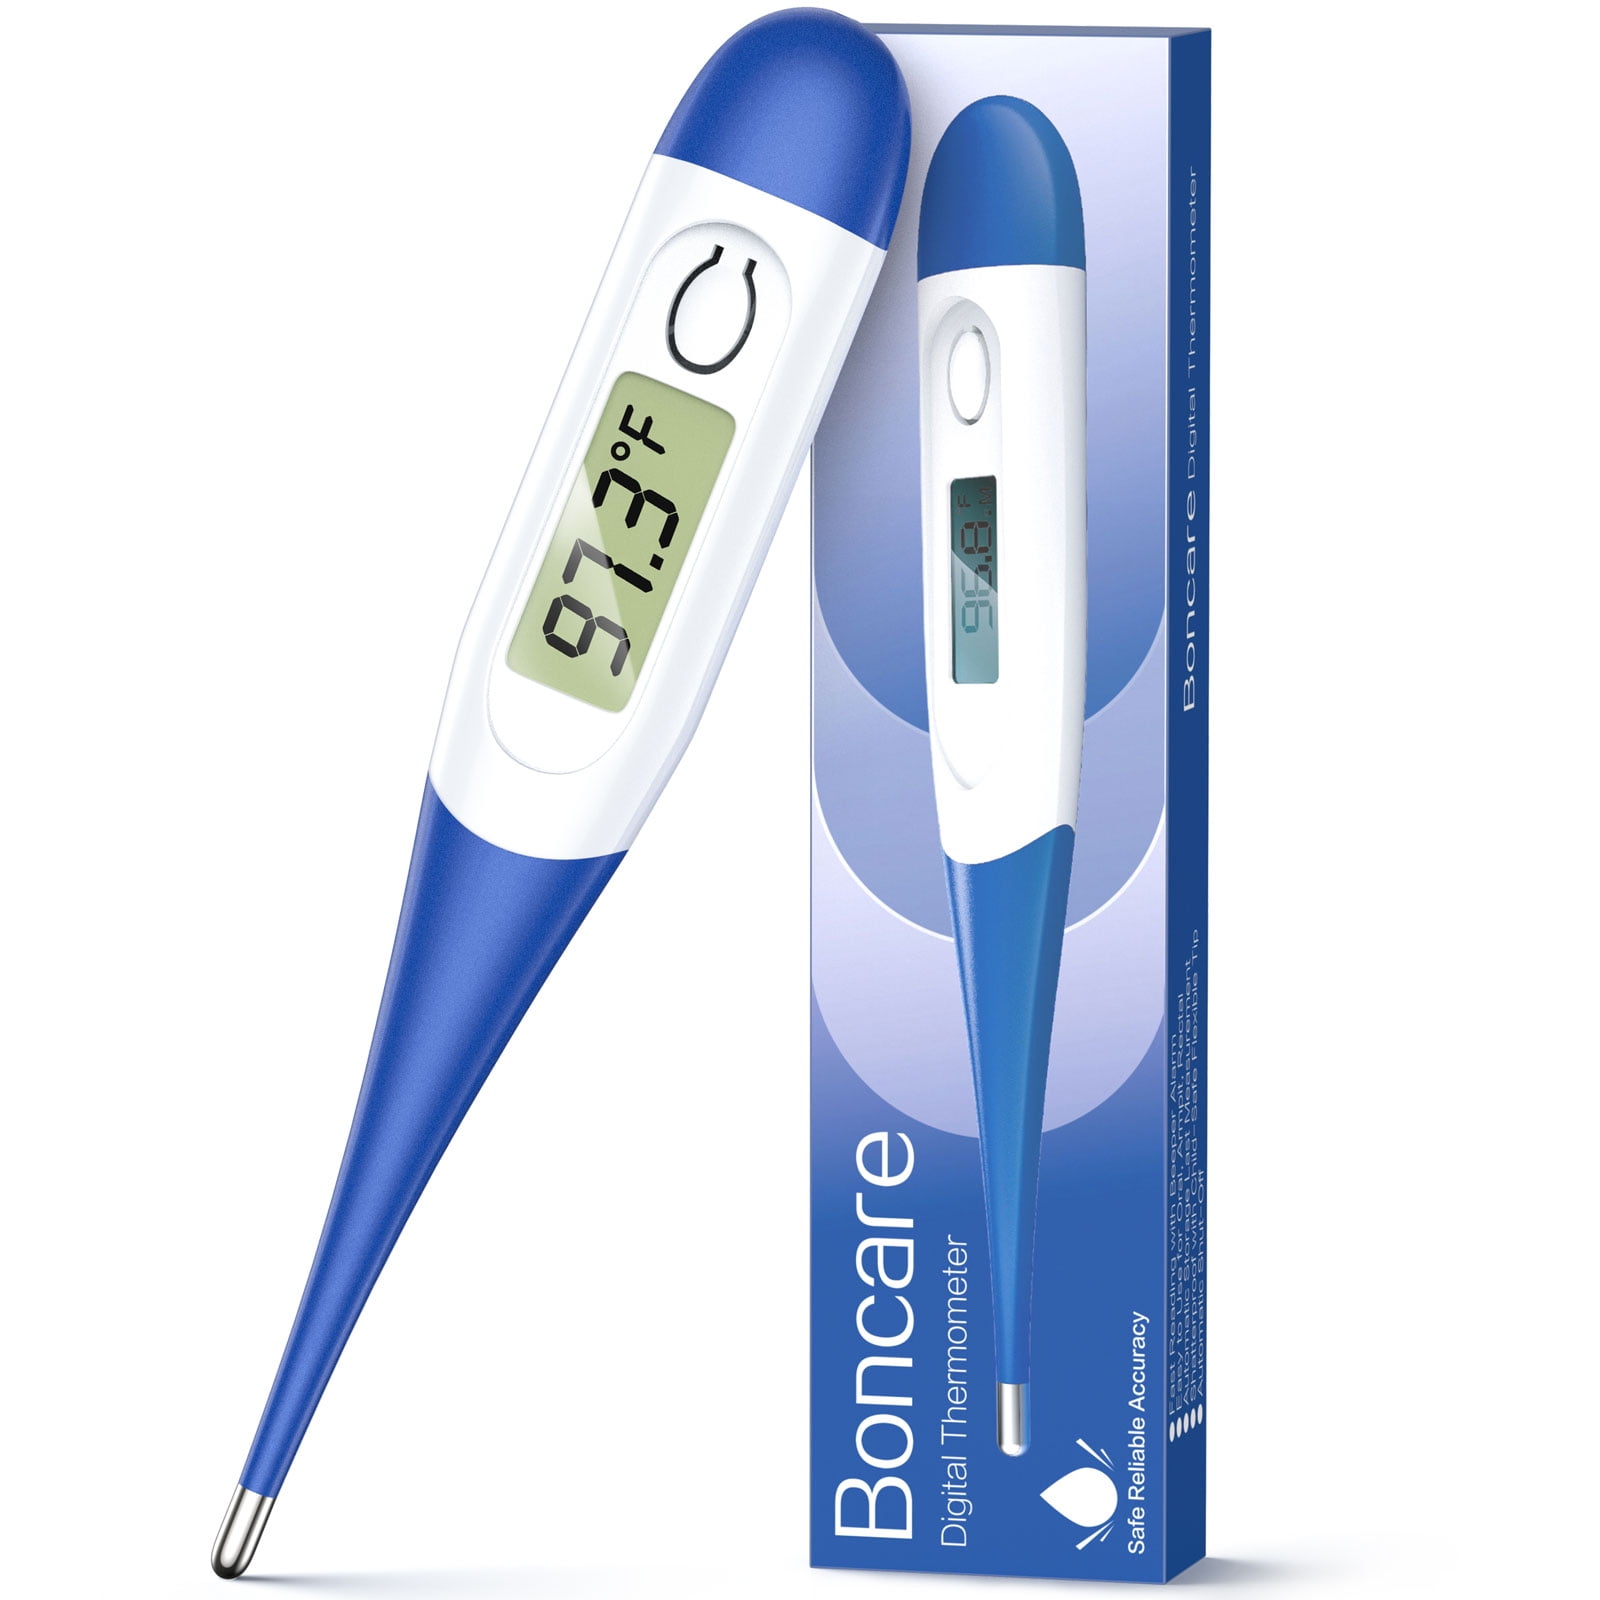 Rectal and Underarm Measurement for Fever Digital Body Thermometer Thermometer Fast Read Temperature Meter Adults Or Kids Oral 